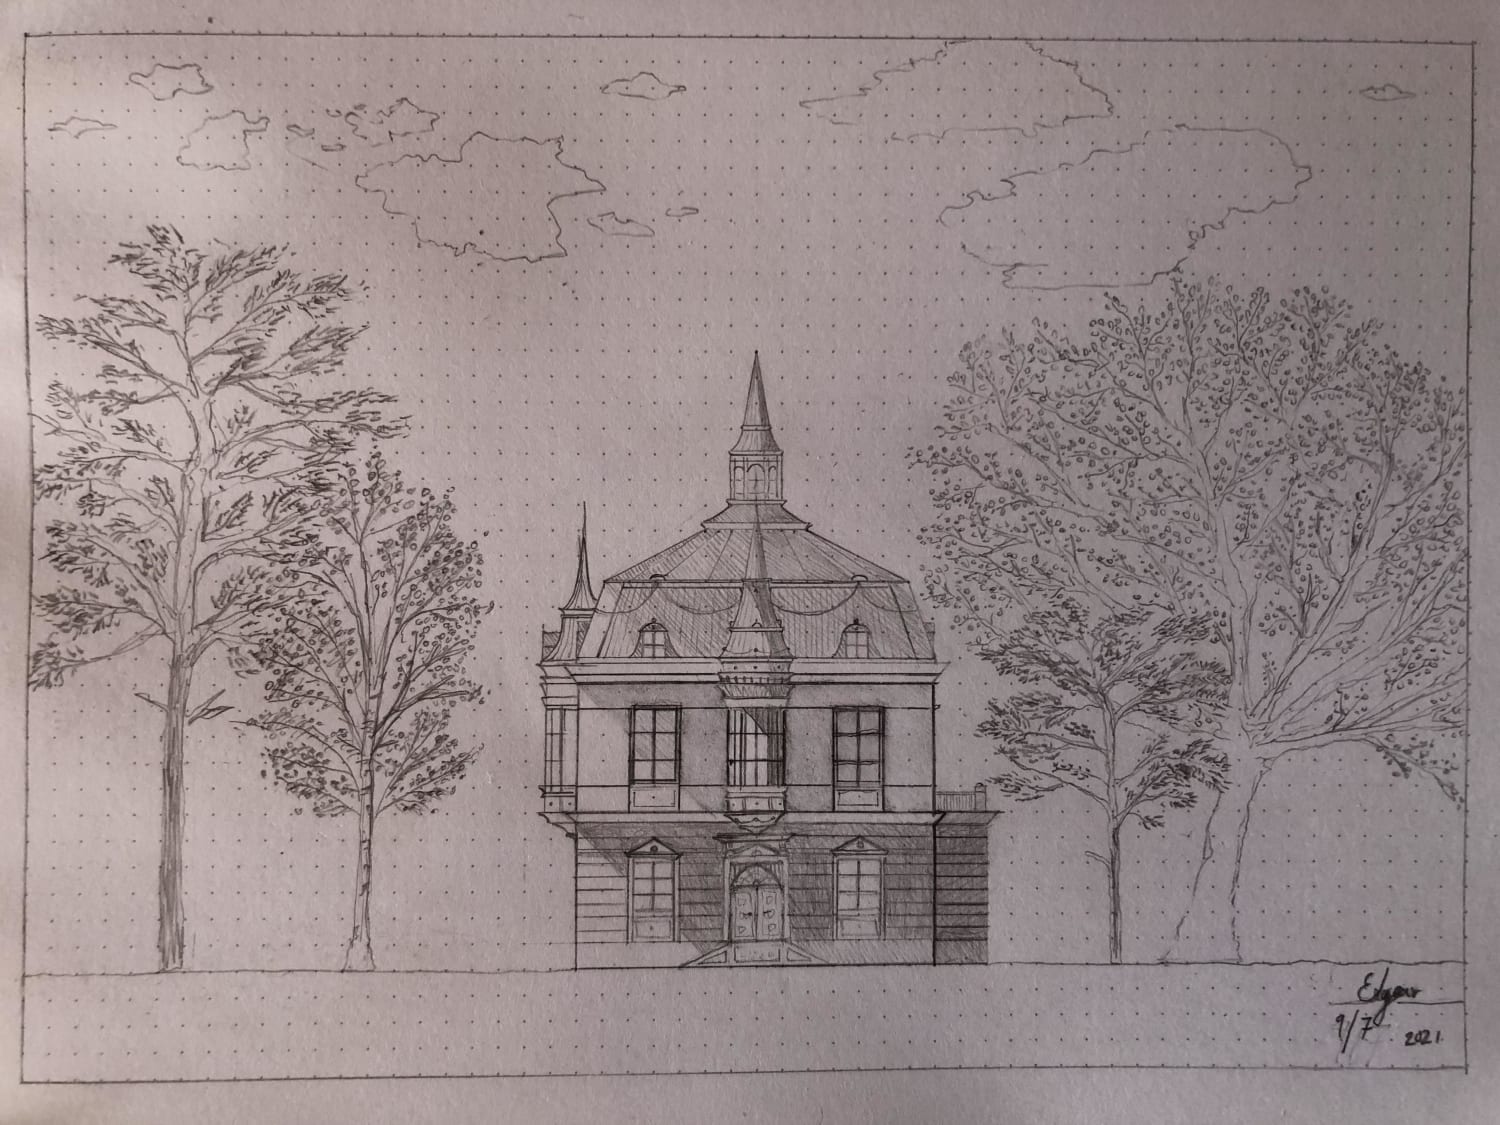 Hello! I’m a 14 year old aspiring architect from Sweden who likes “old styles” (aka classical and jugend). I drew this just for fun! Please tell me what you think about it!